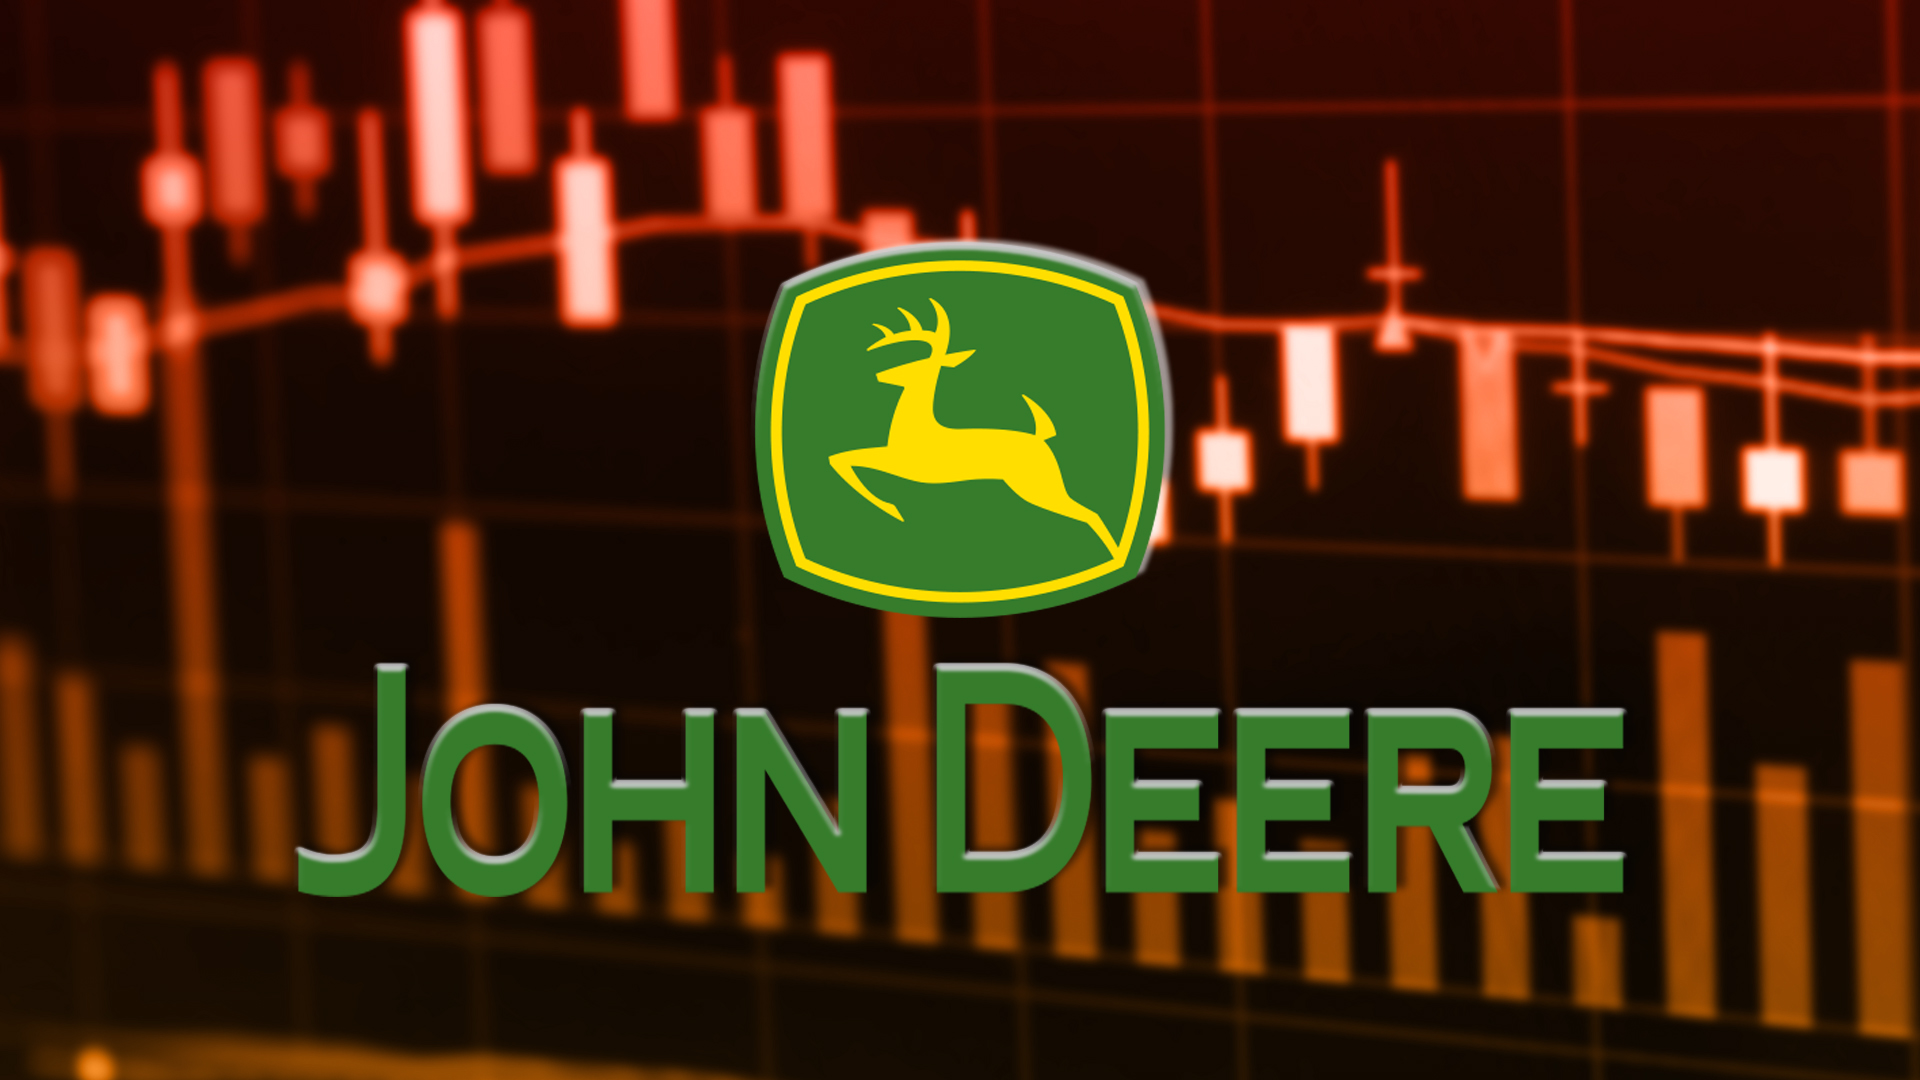 Deere & Company (DE Stock) : Is DE Stock Price Marching for an Annual High?